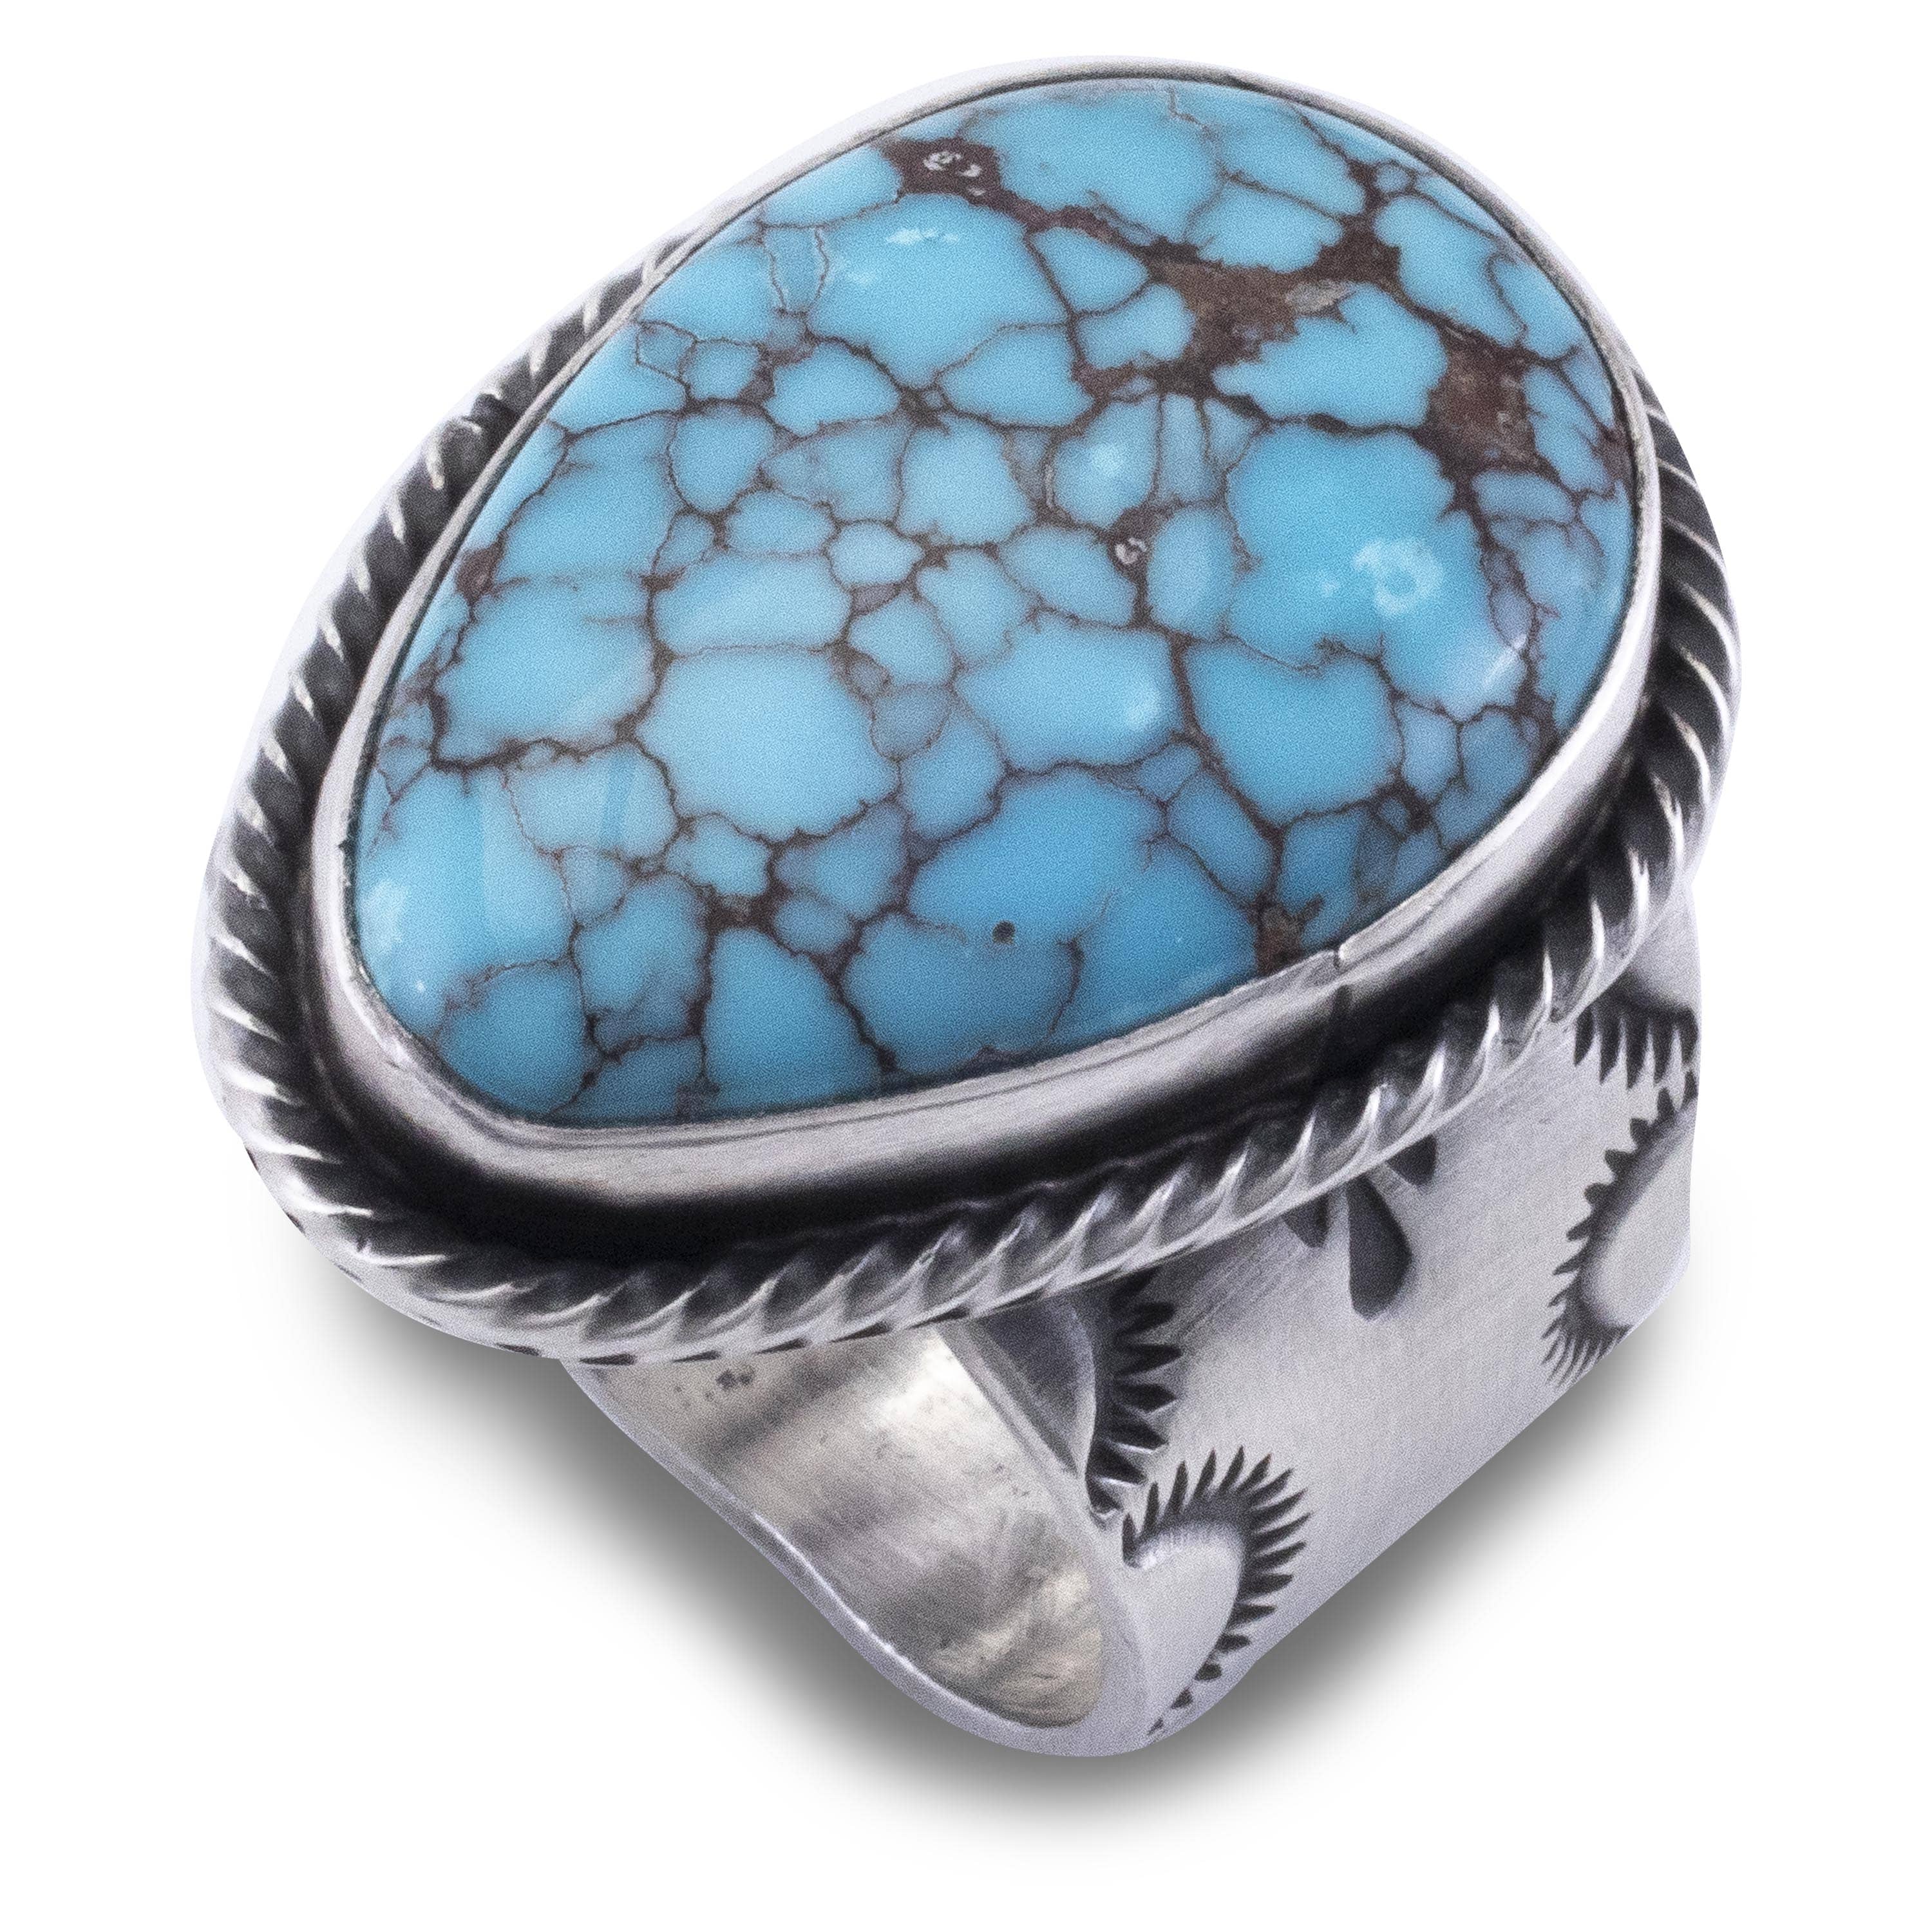 Kalifano Native American Jewelry 9 Prince Turquoise Teardrop USA Native American Made 925 Sterling Silver Ring NAR1200.049.9